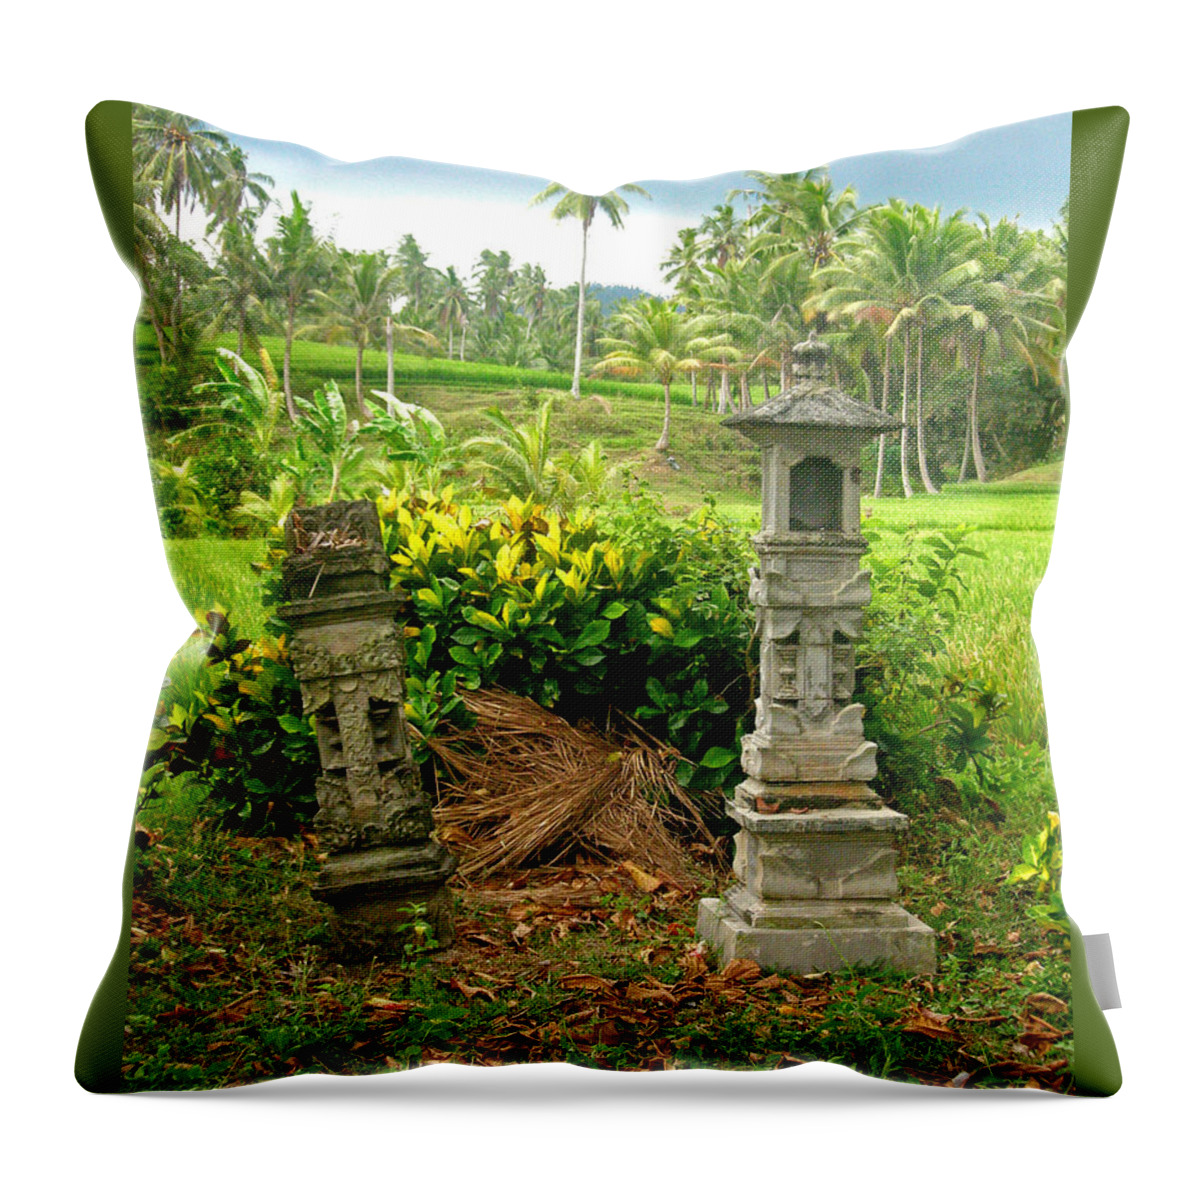  Indonesia Throw Pillow featuring the photograph Balinese Rice Field Shrines by Mark Sellers